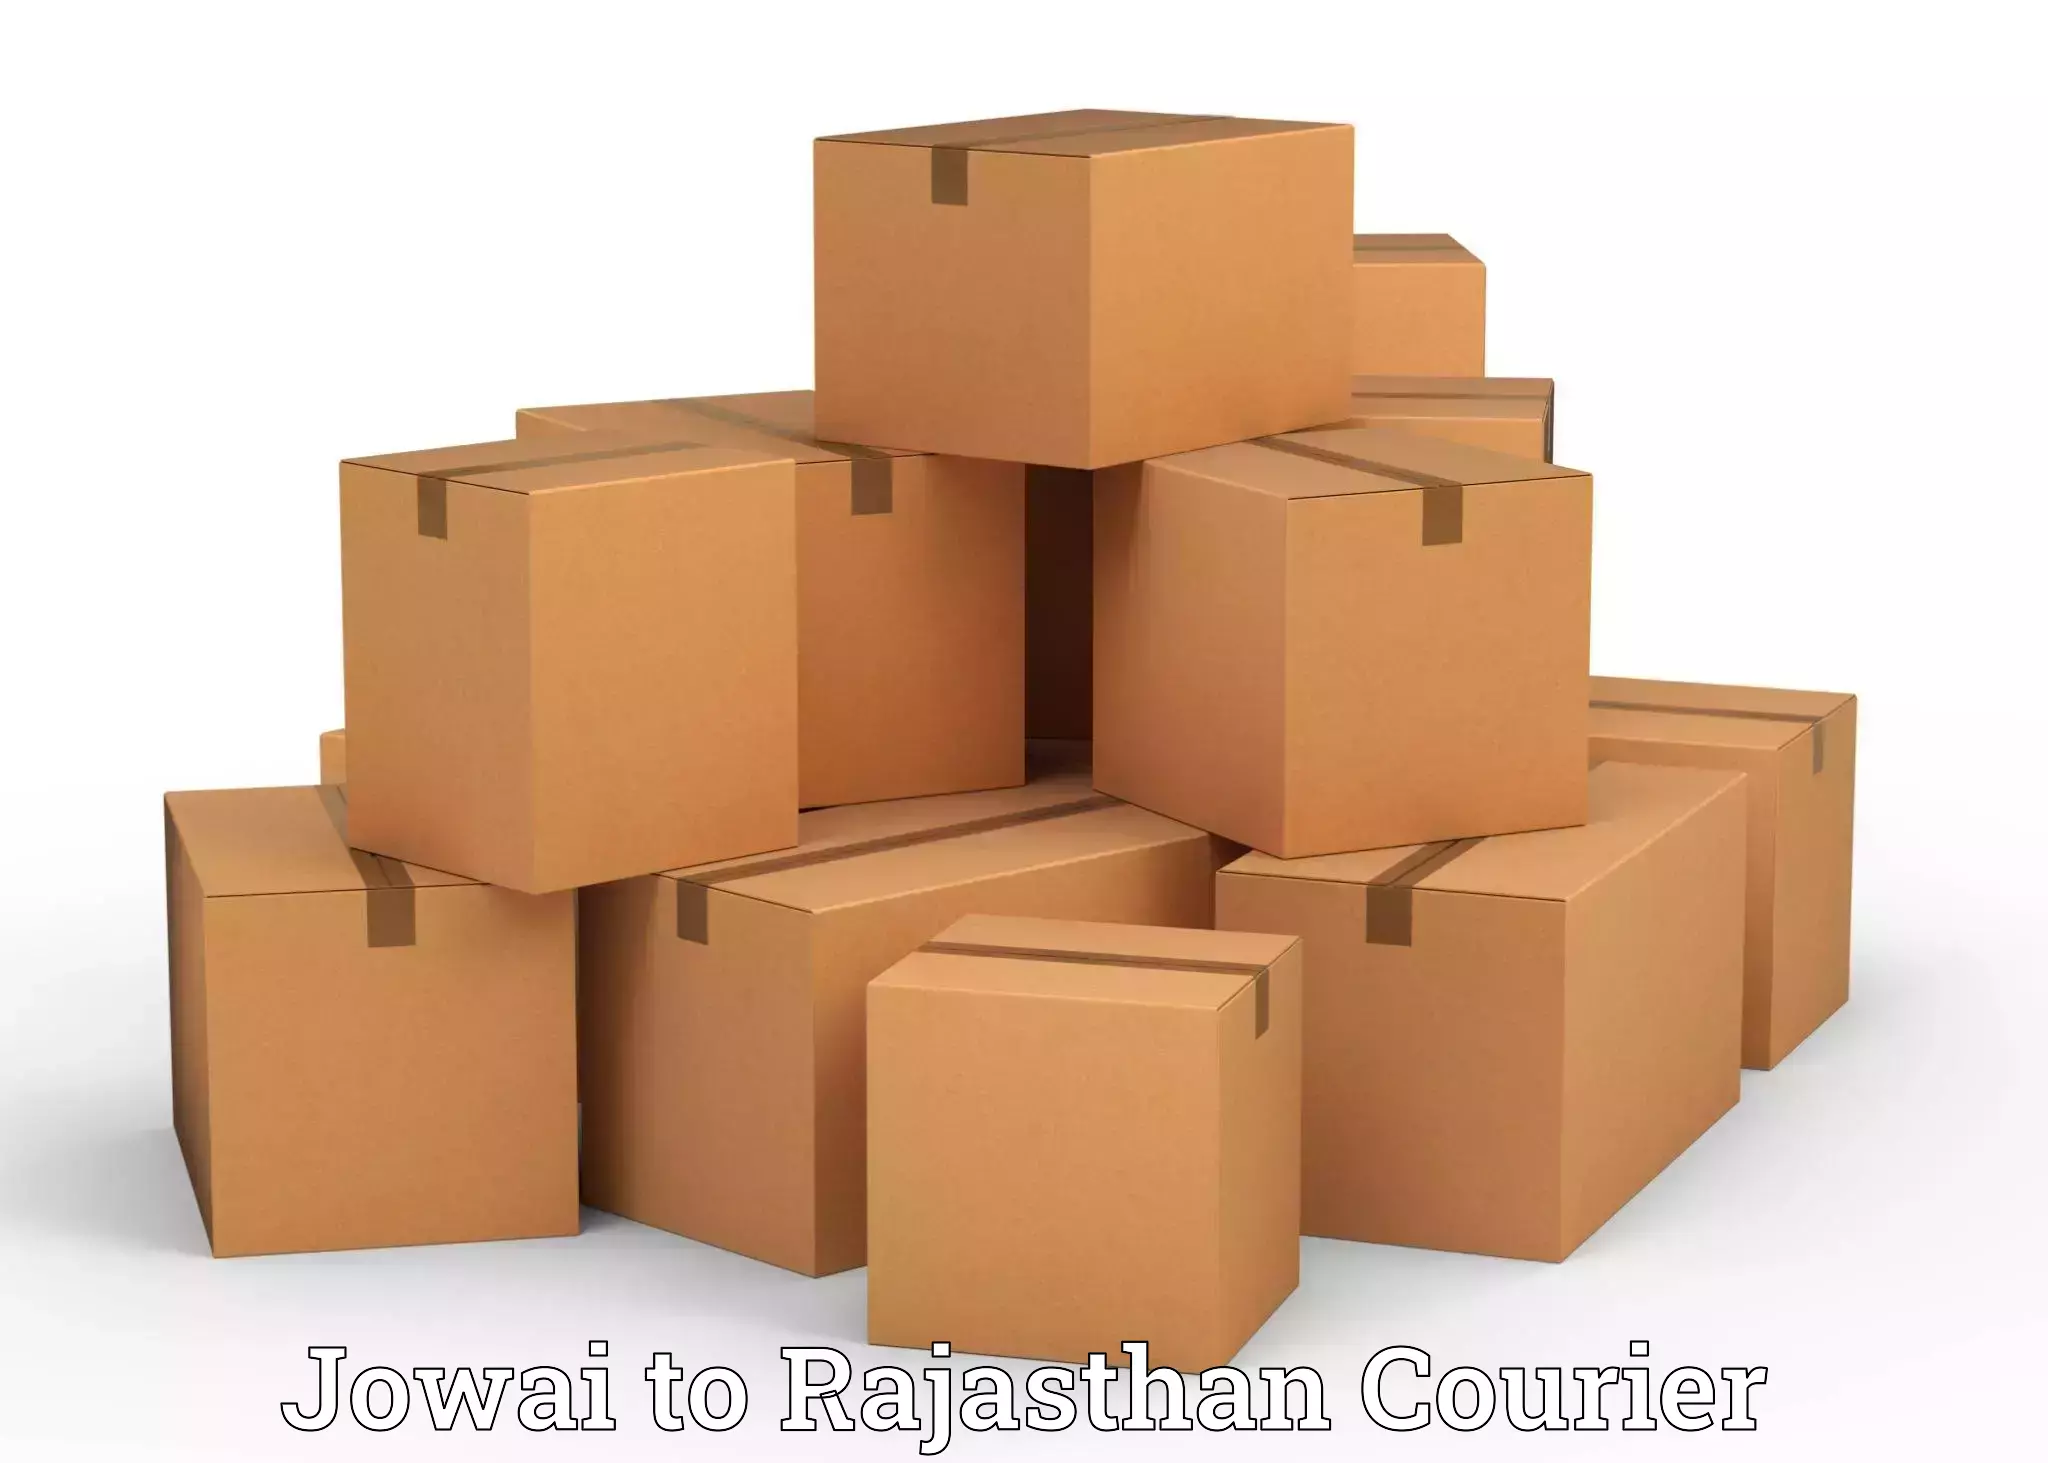 Professional relocation services in Jowai to Dudu